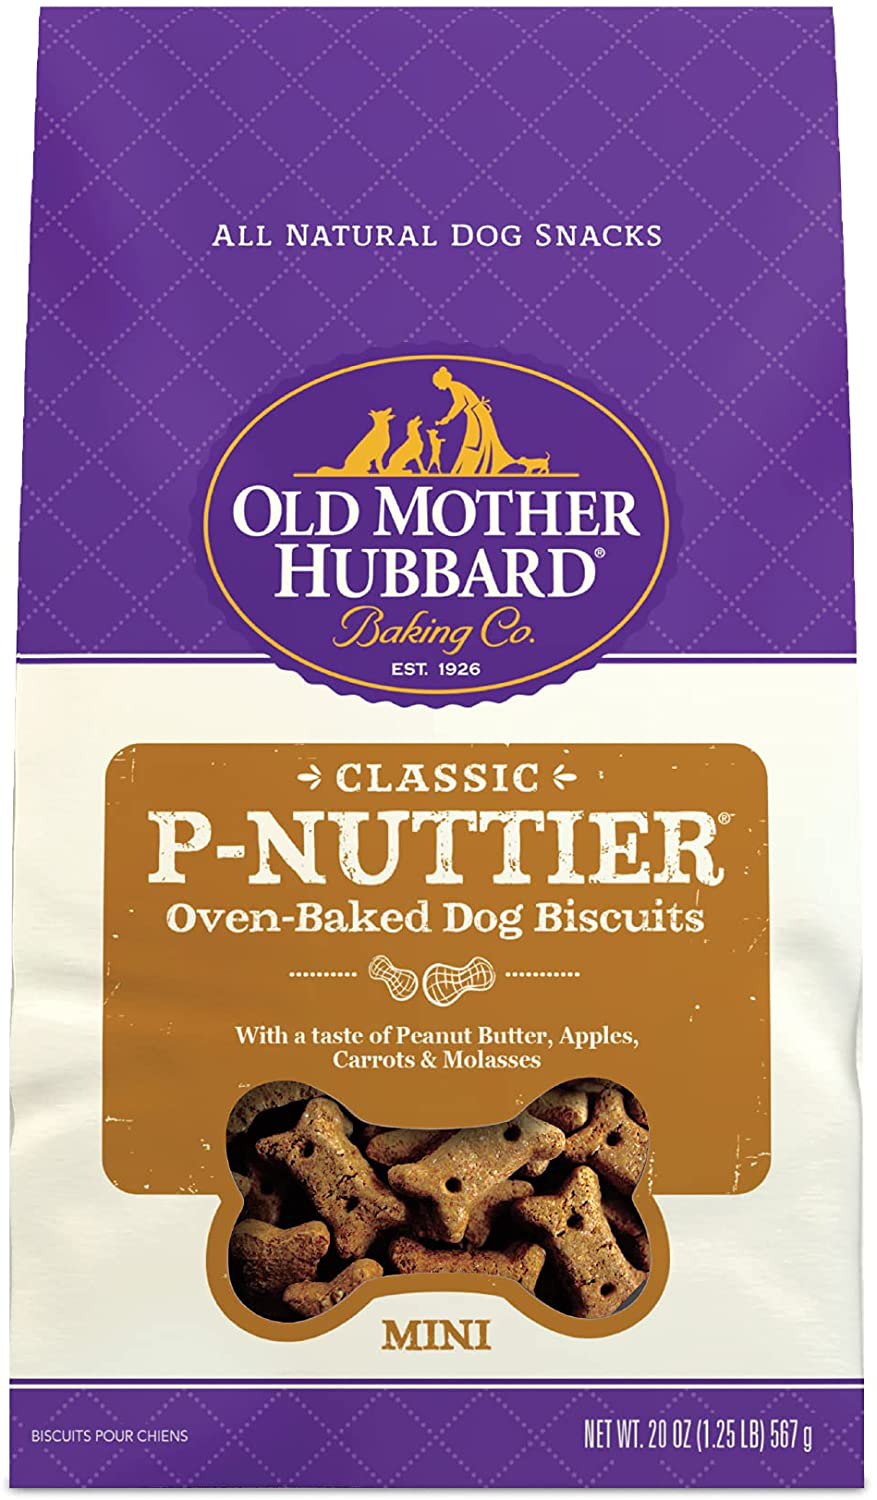 Old Mother Hubbard Classic P-Nuttier Peanut Butter Dog Treats, Oven Baked Crunchy Treats for Small Dogs, Natural, Healthy, Mini Training Treats Animals & Pet Supplies > Pet Supplies > Dog Supplies > Dog Treats WellPet LLC 20 Ounce Bag (Pack of 1)  